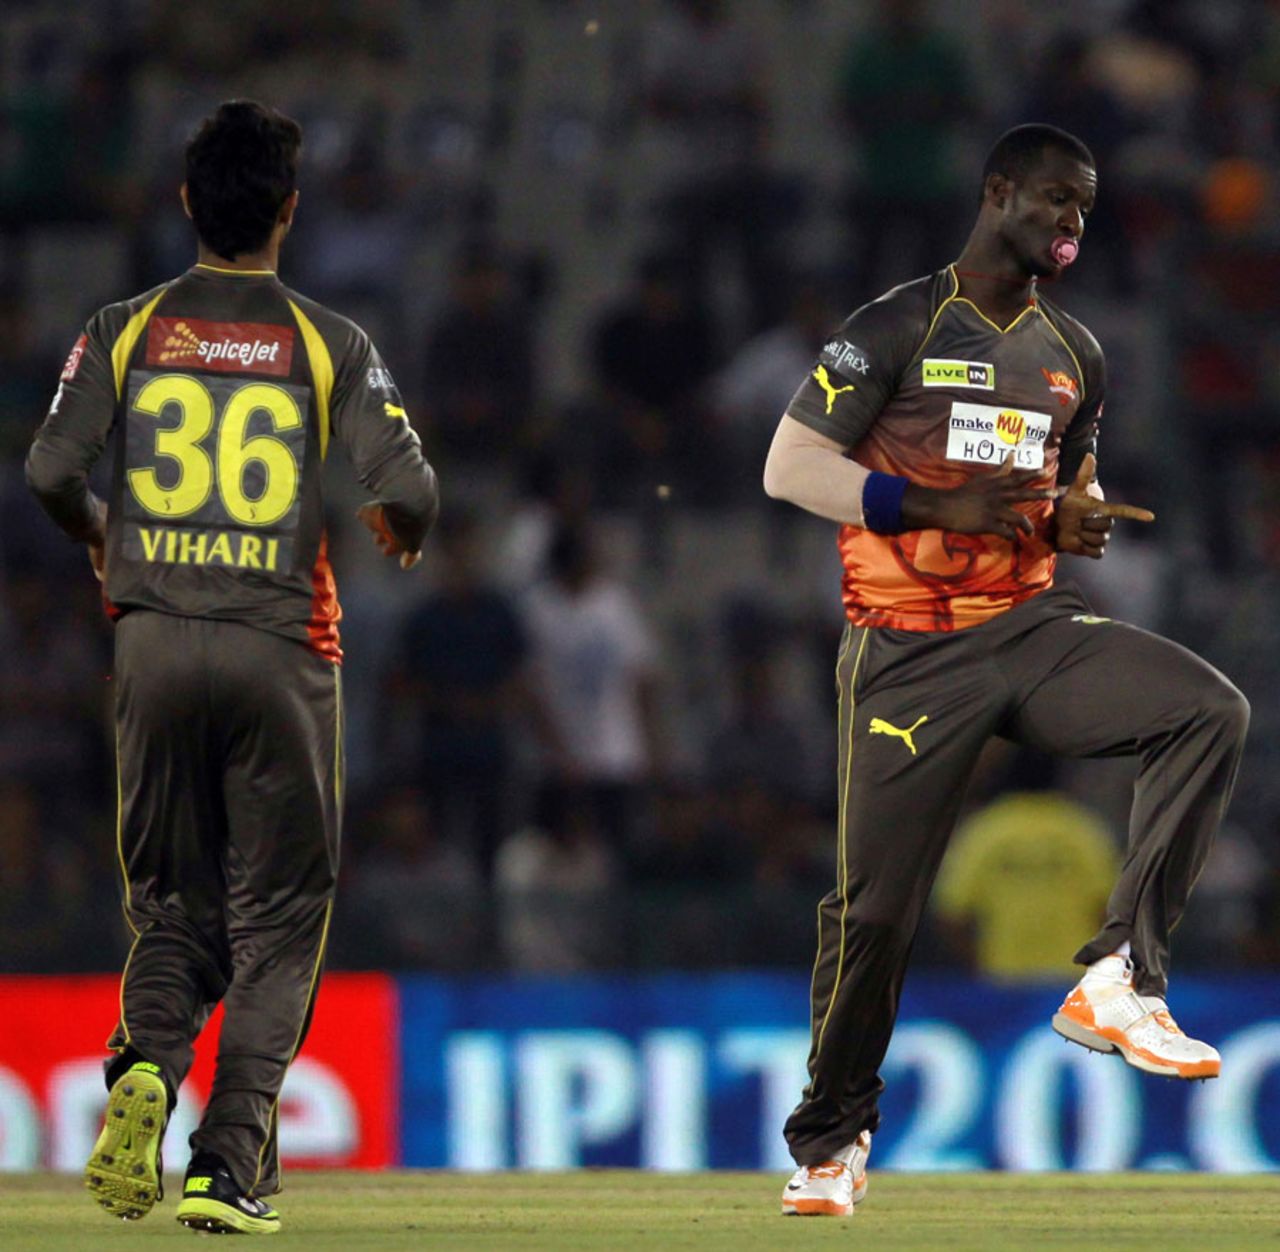 Darren Sammy does a little jig with a pacifier after claiming a wicket, Kings XI Punjab v Sunrisers Hyderabad, IPL, Mohali, May 11, 2013